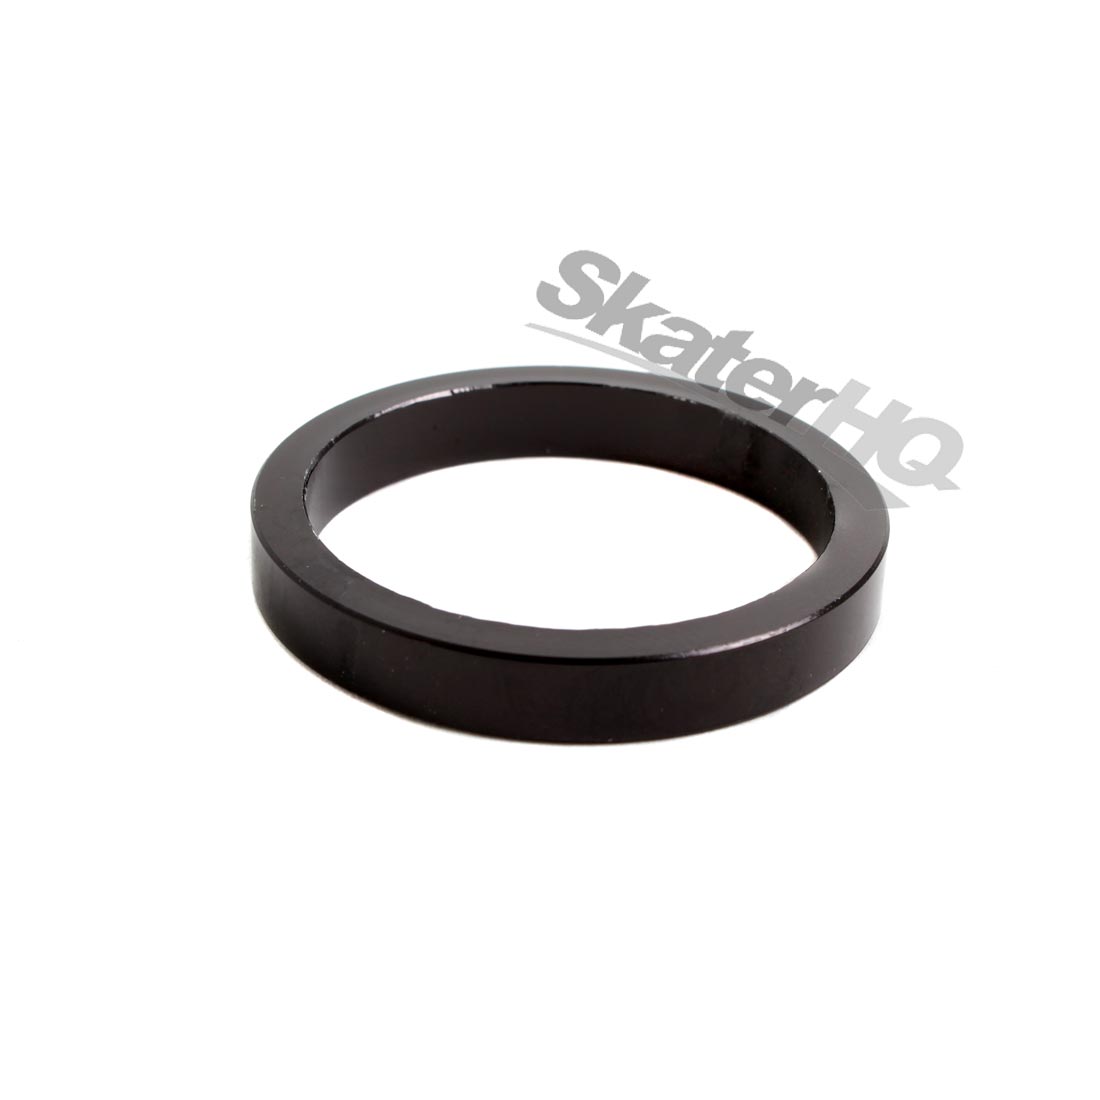 5mm Headset Spacer - Black Scooter Hardware and Parts